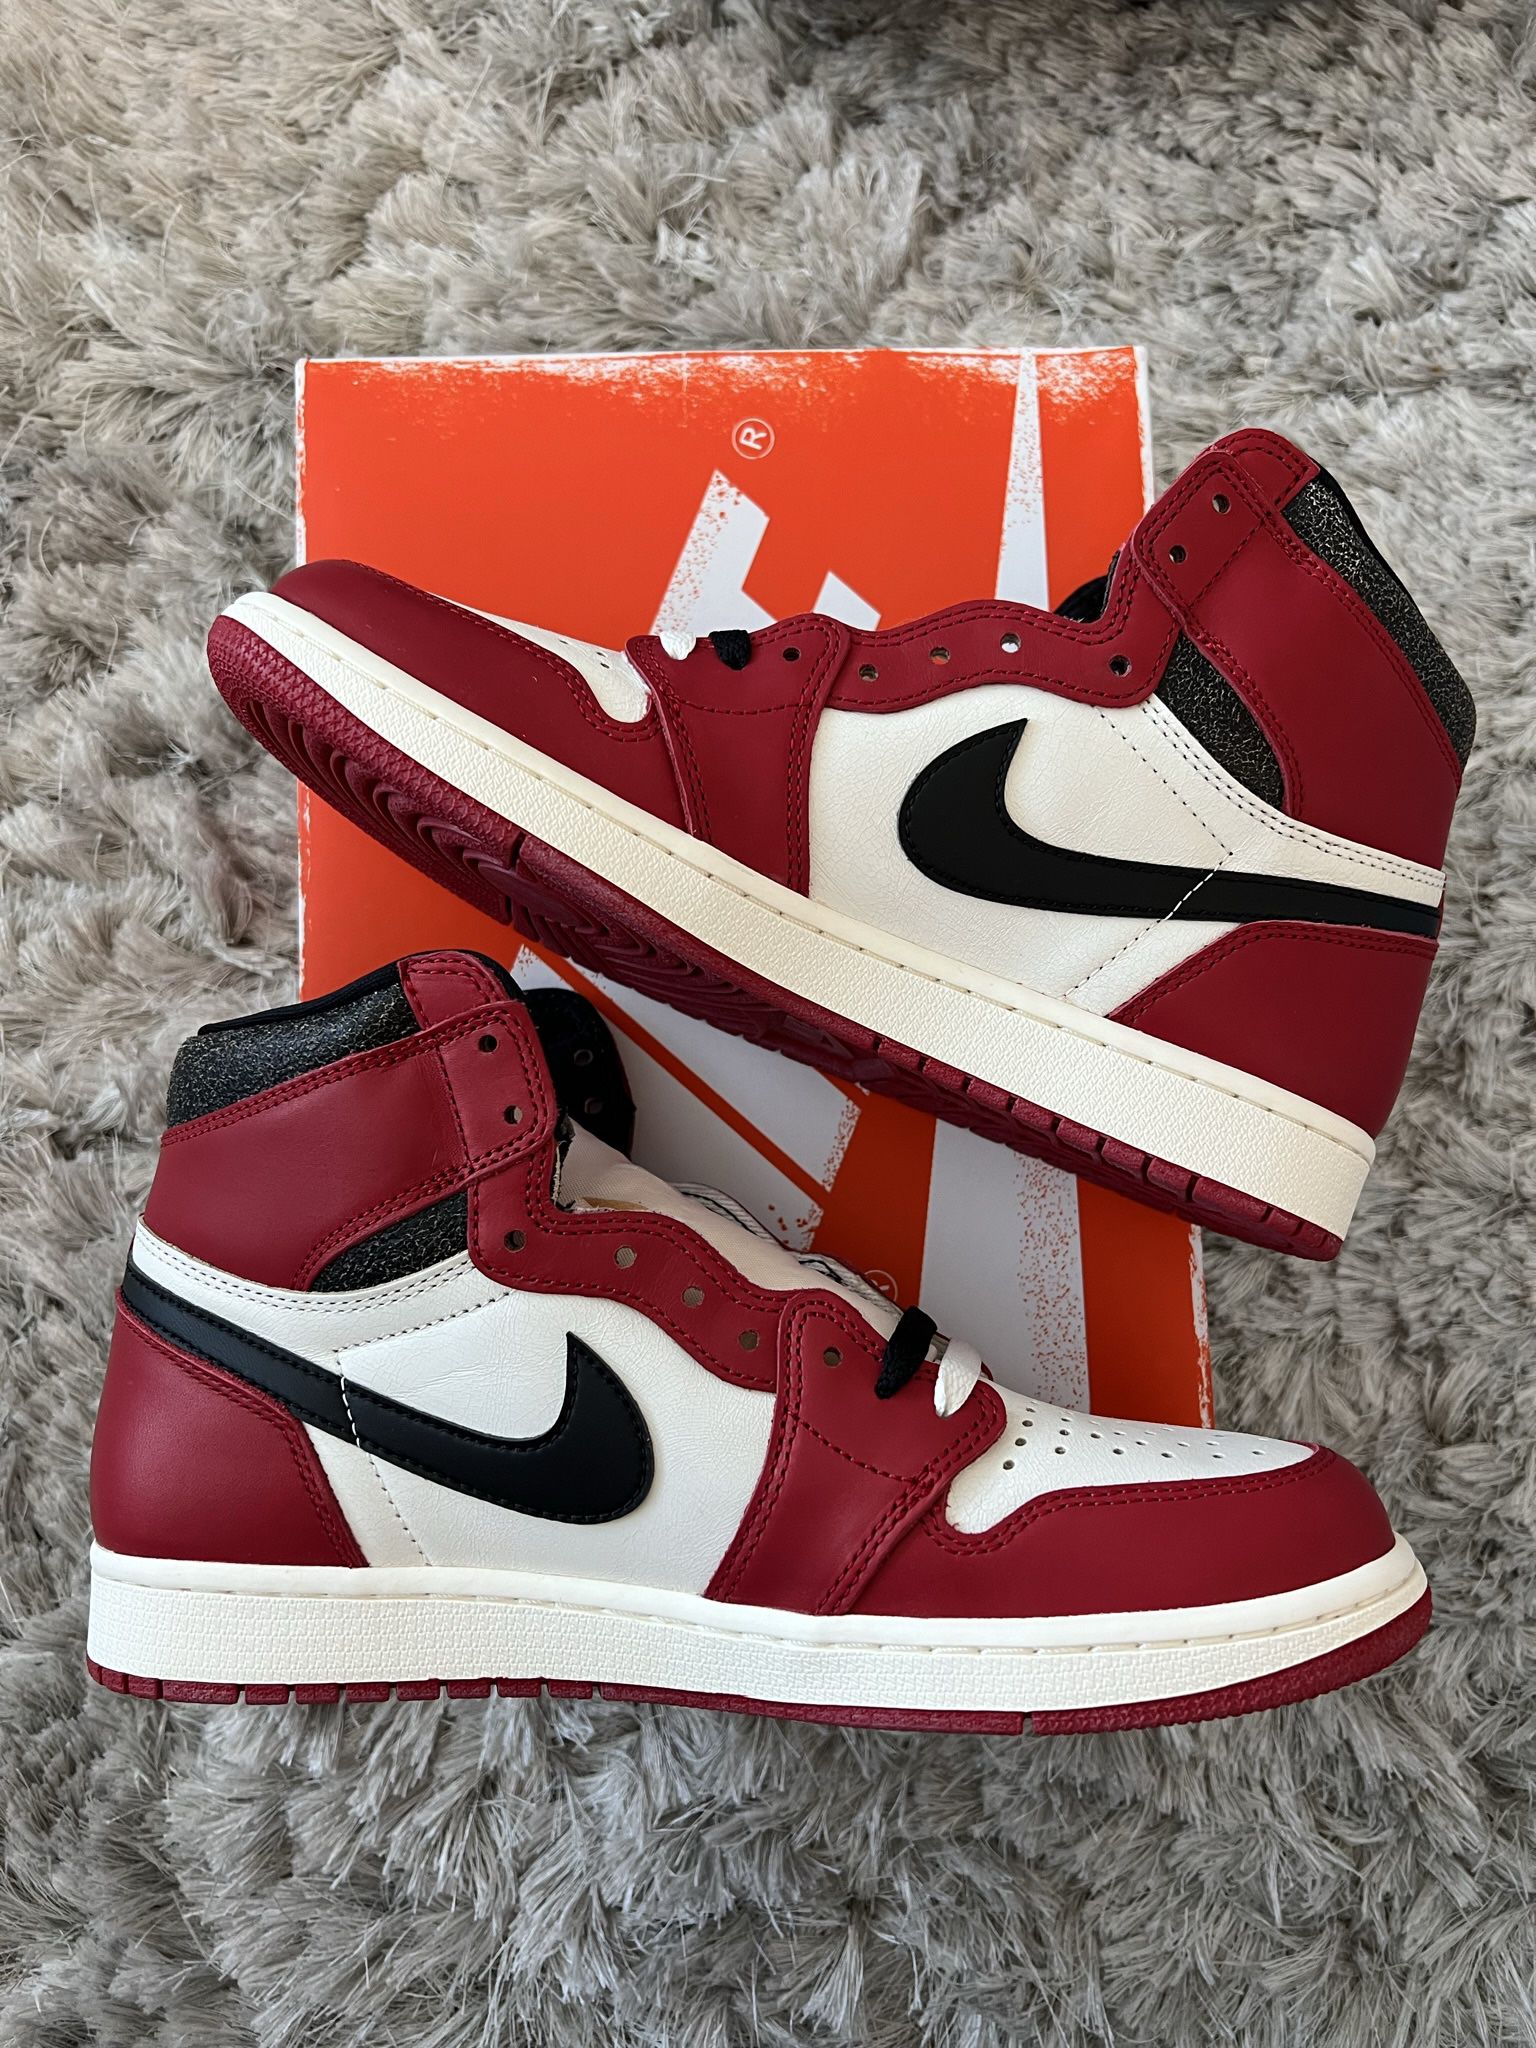 Nike Jordan 1 AJ1 High Chicago Lost And Found Size 6.5Y Brand New